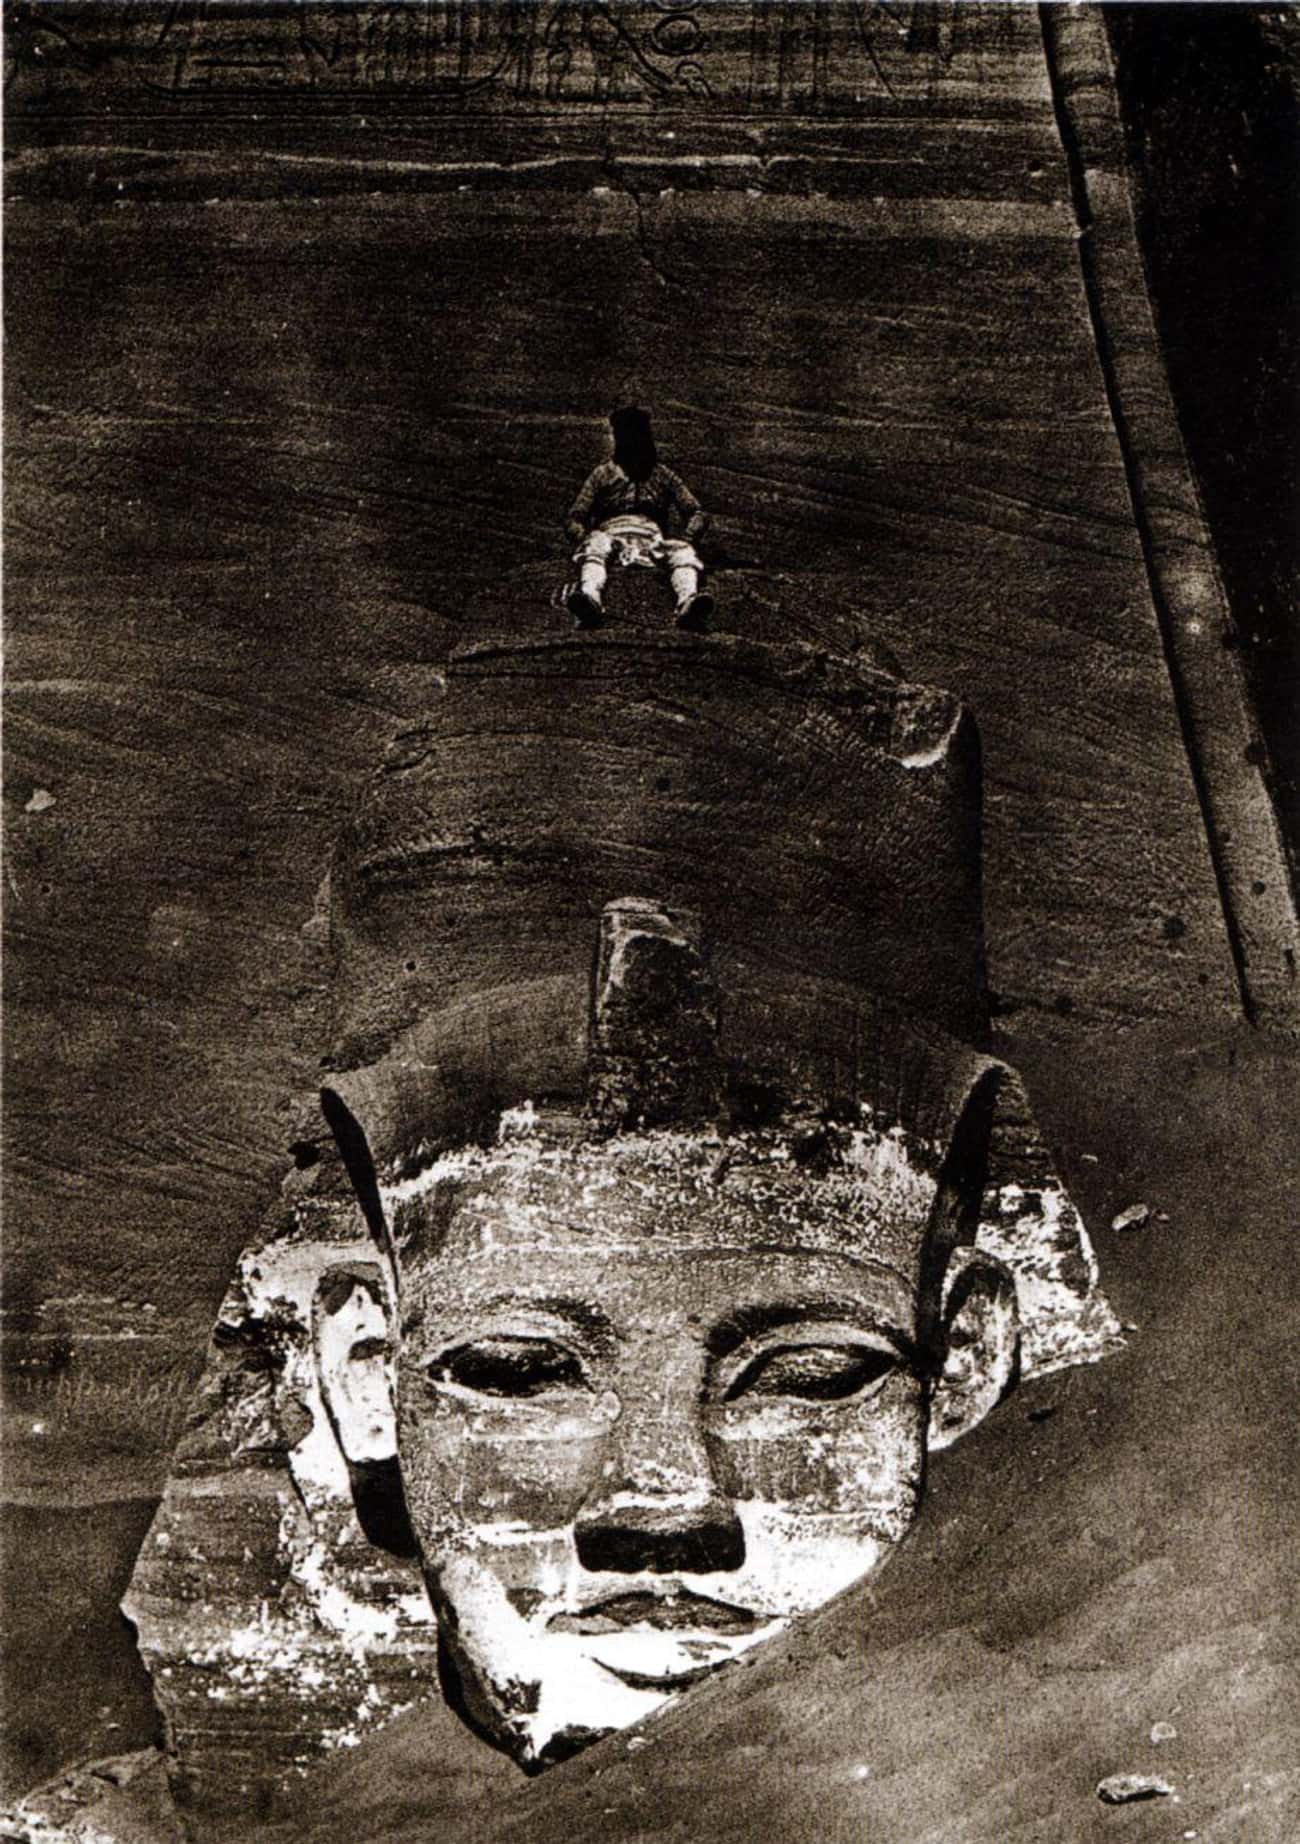 A Colossal Statue Of Ramses II Half Sunk In The Sand, C. 1850